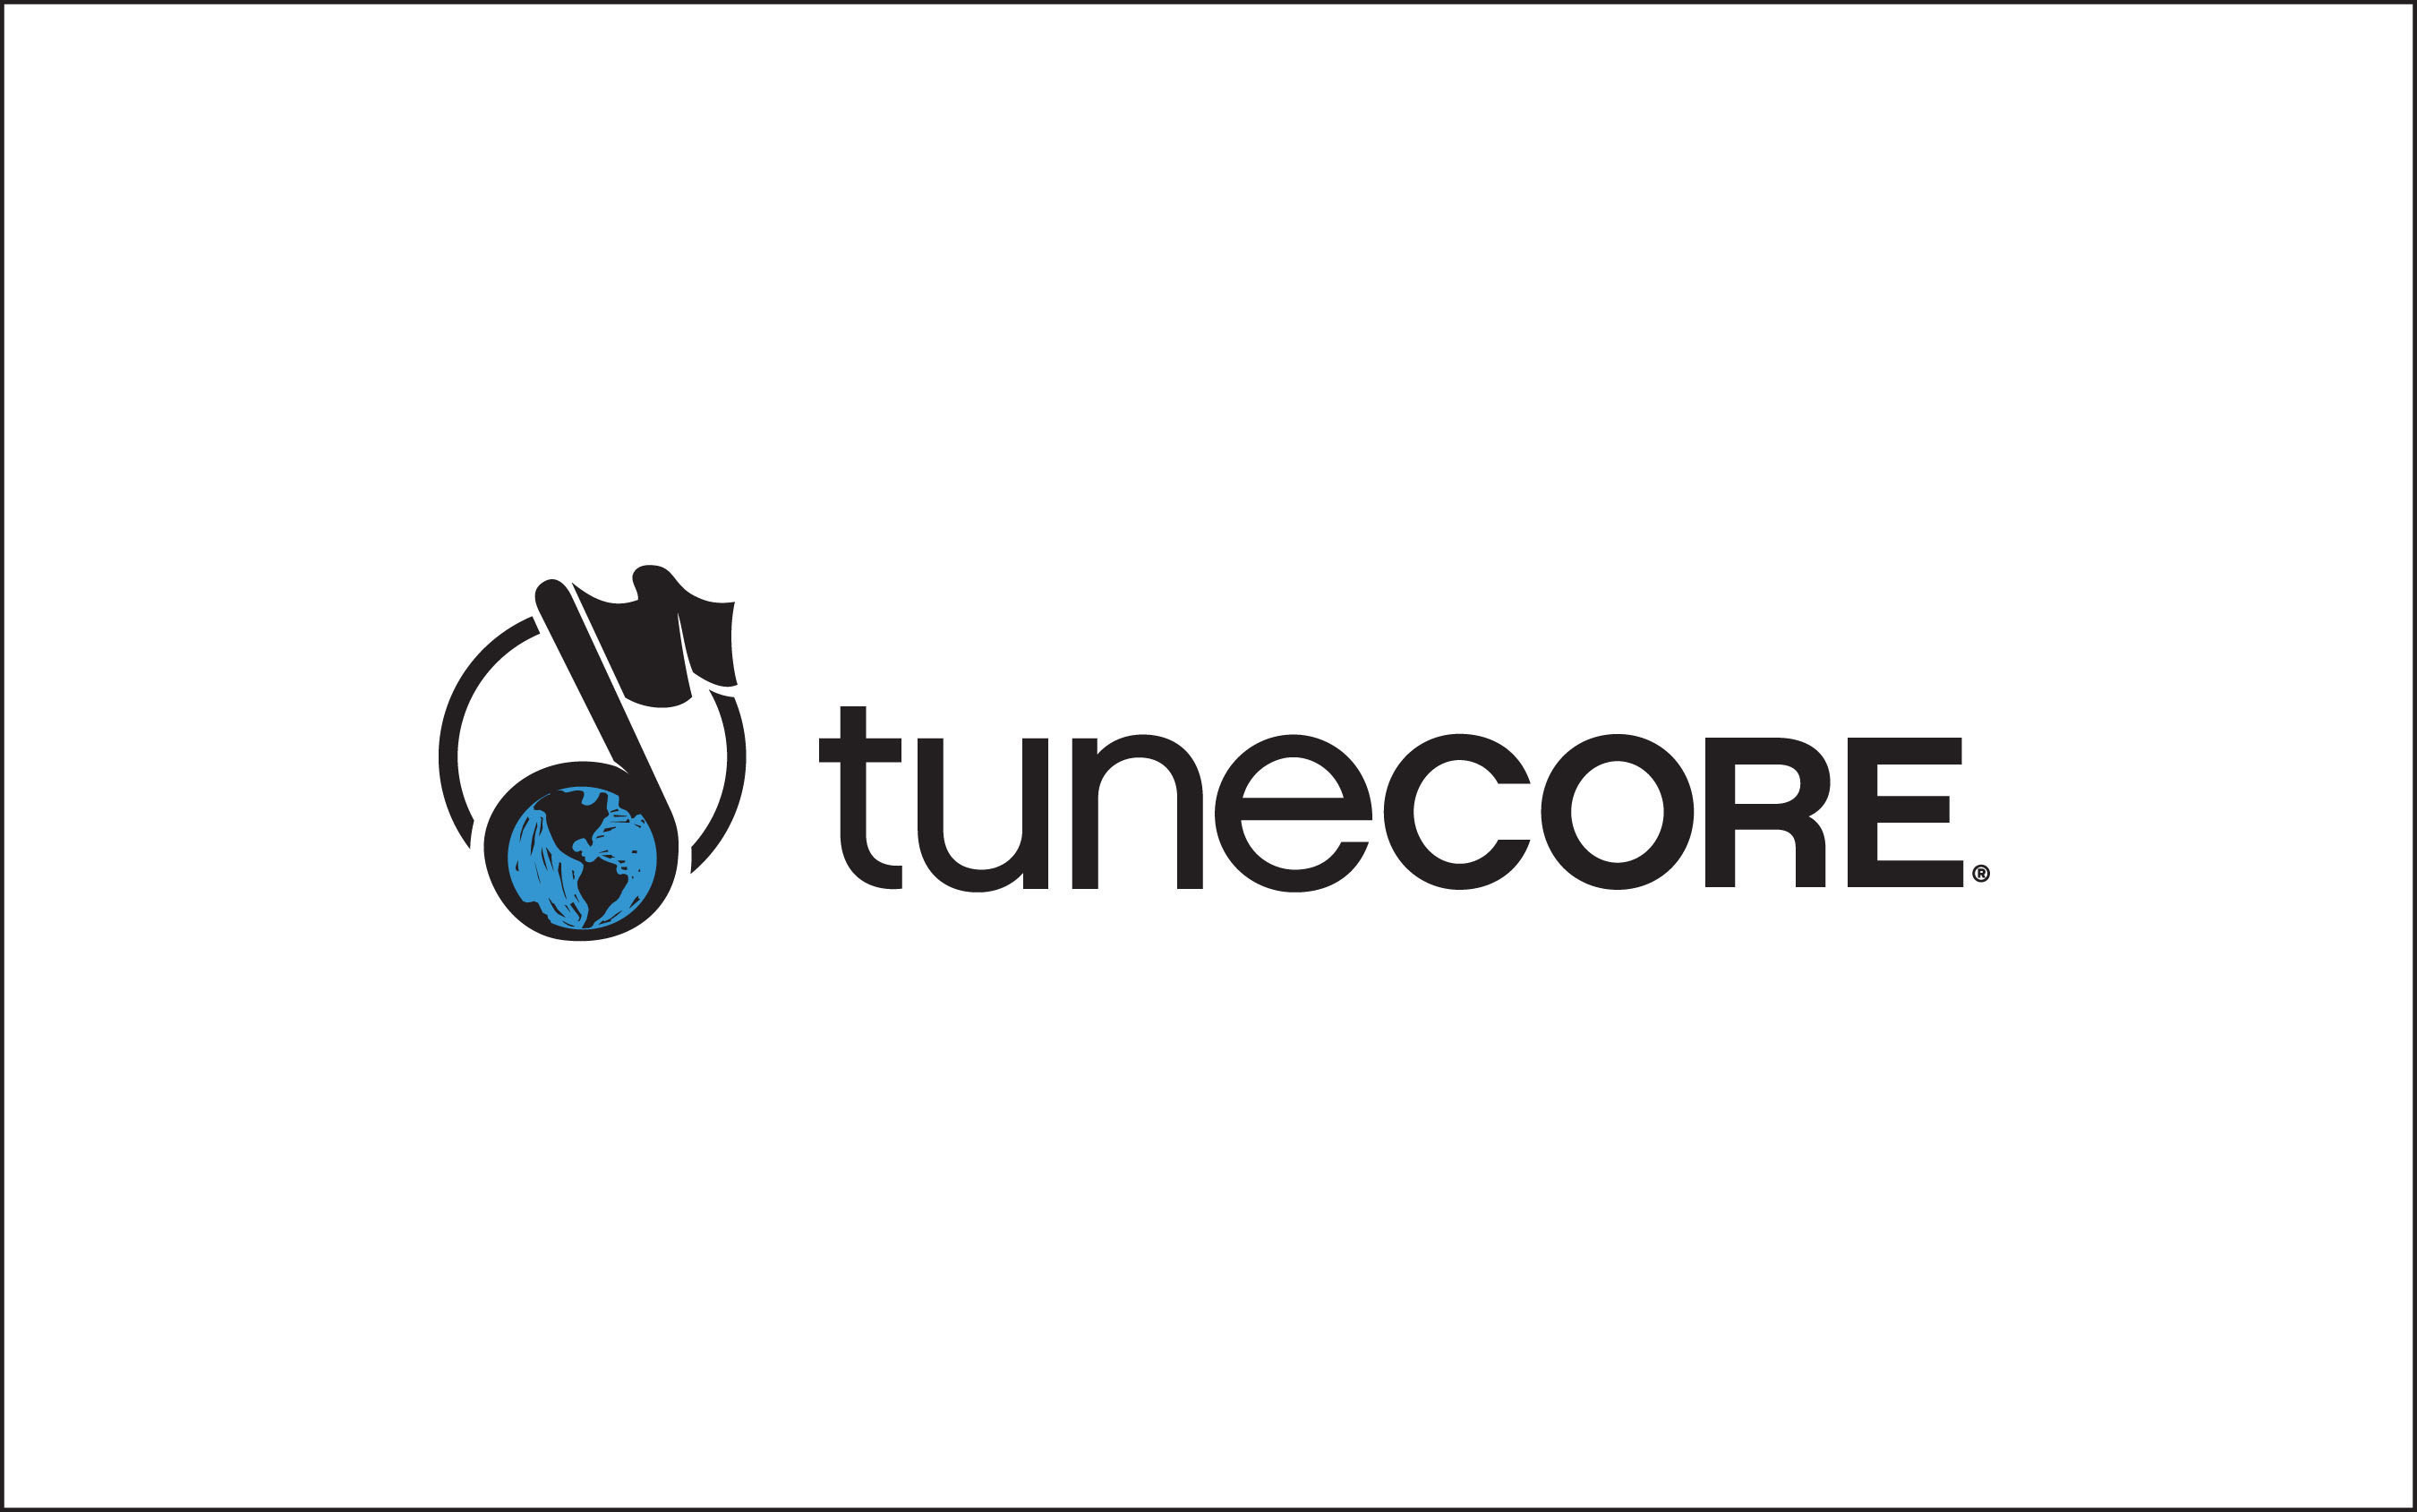 TuneCore brings more music to more people, while helping musicians and songwriters increase money-earning opportunities and take charge of their own careers. The company has one of the highest artist revenue-generating music catalogs in the world, earning TuneCore Artists $504 million on 12 billion streams and downloads since inception. TuneCore Music Distribution helps artists, labels and managers sell their music through iTunes, Amazon MP3, Spotify and other major download and streaming sites while retaining 100% of their sales revenue. TuneCore Music Publishing Administration assists songwriters by administering their compositions through licensing, registration and worldwide royalty collection, including YouTube monetization. (PRNewsFoto/TuneCore)